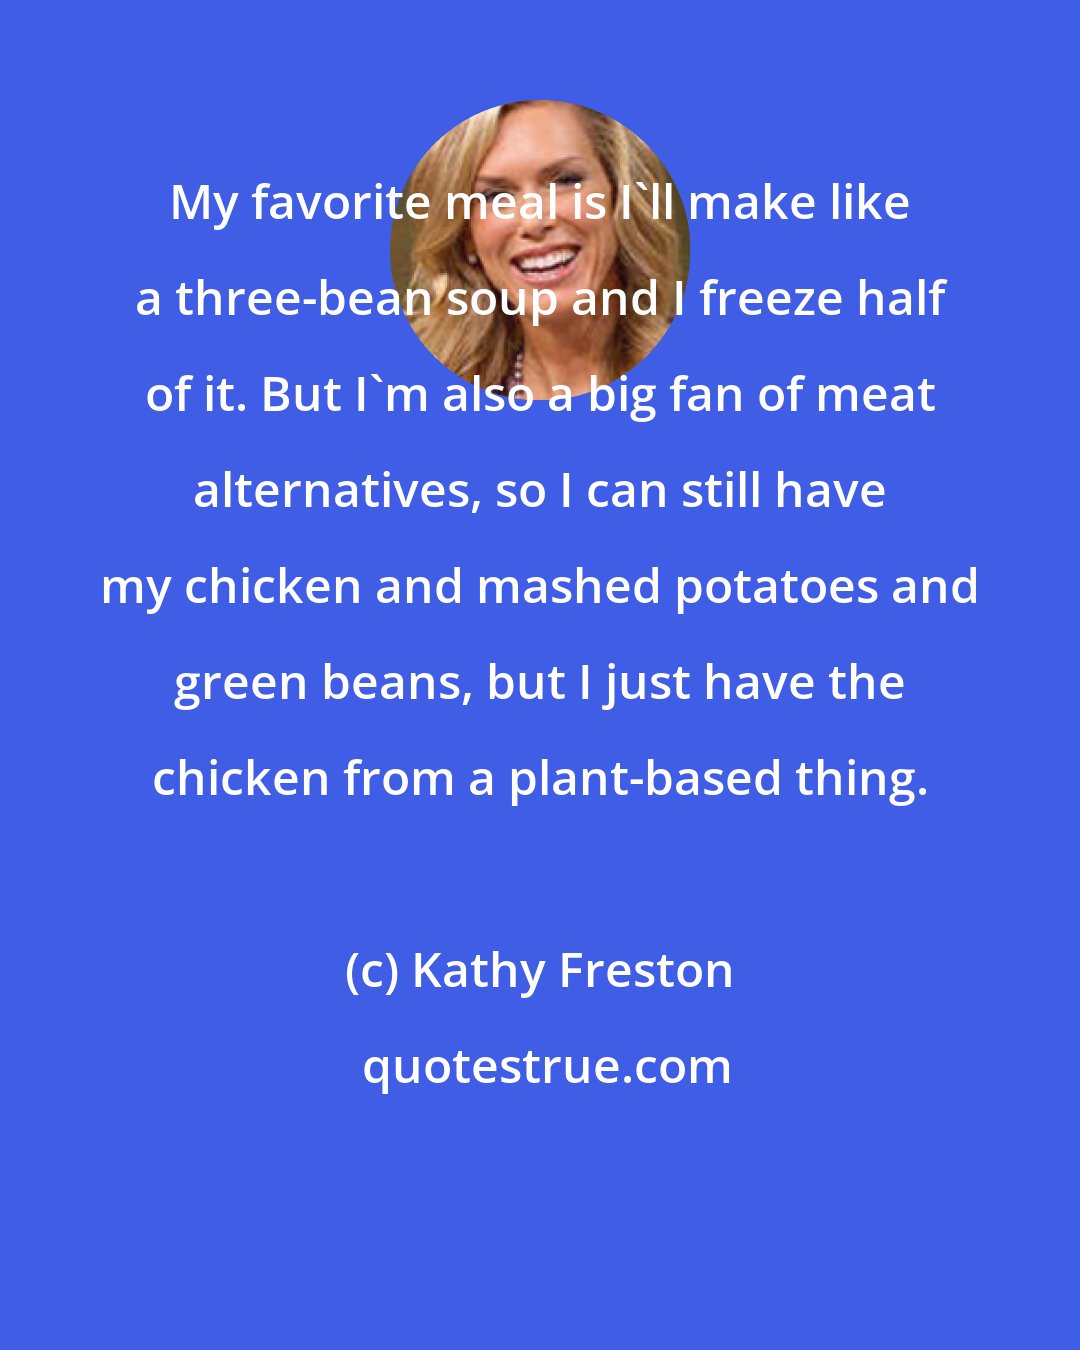 Kathy Freston: My favorite meal is I'll make like a three-bean soup and I freeze half of it. But I'm also a big fan of meat alternatives, so I can still have my chicken and mashed potatoes and green beans, but I just have the chicken from a plant-based thing.